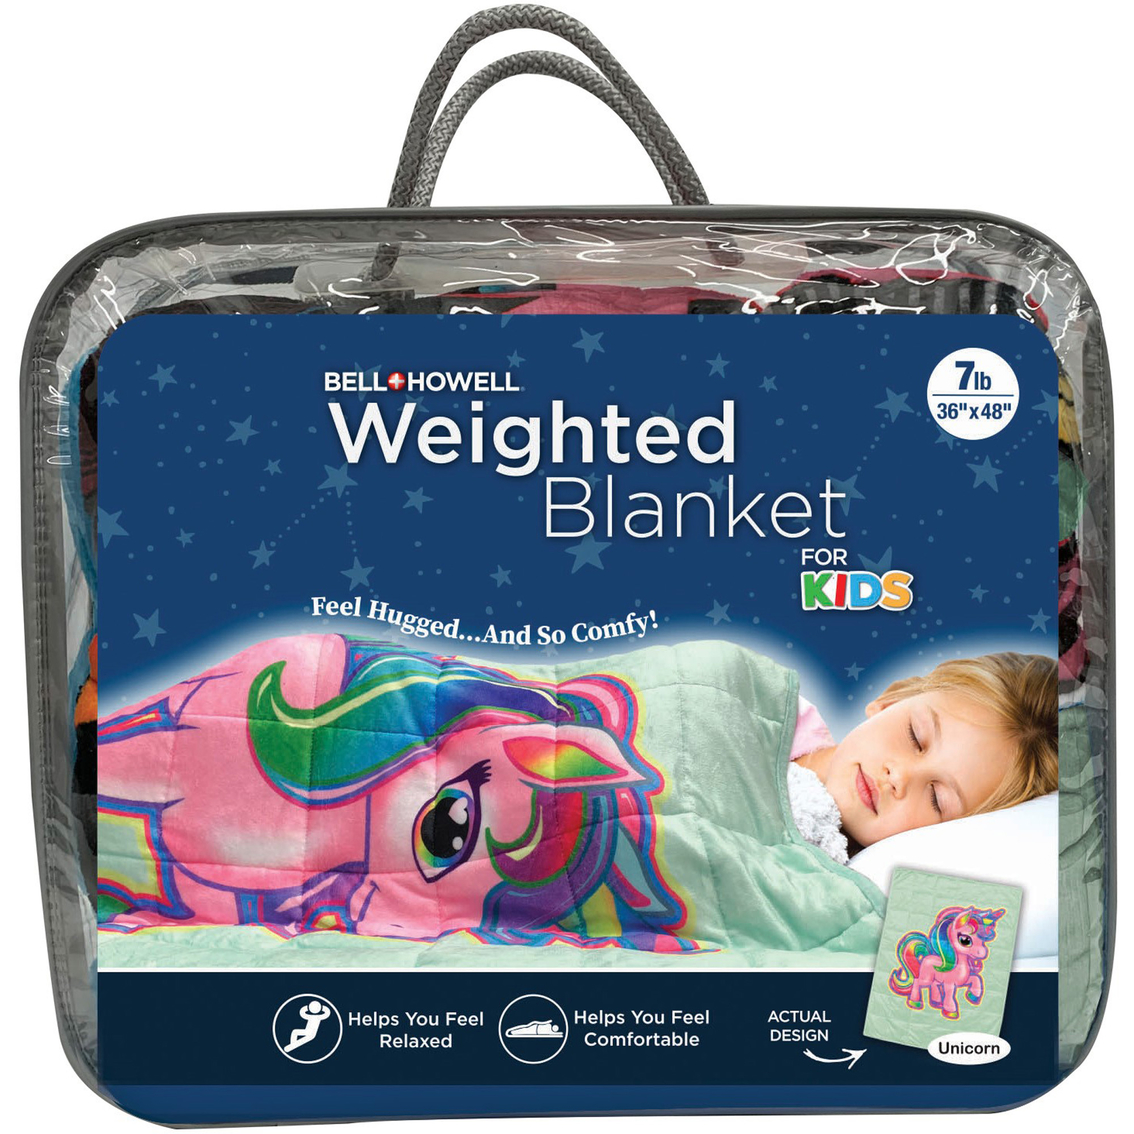 Bell & Howell Kids 7 Lb. Weighted Blanket | Blankets & Throws